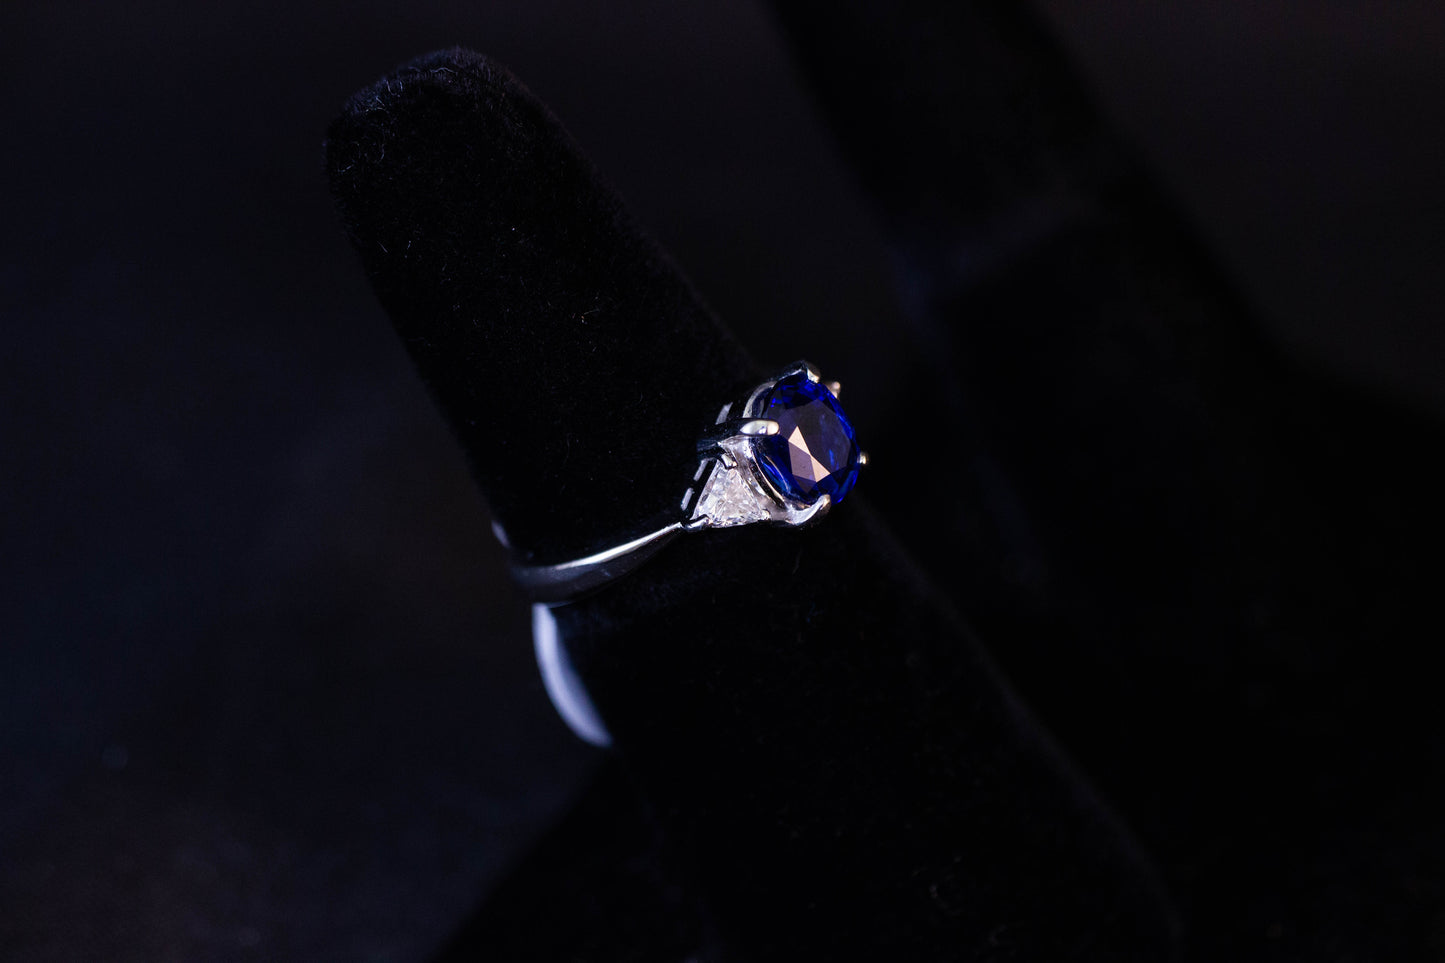 Sapphire Trilogy Ring